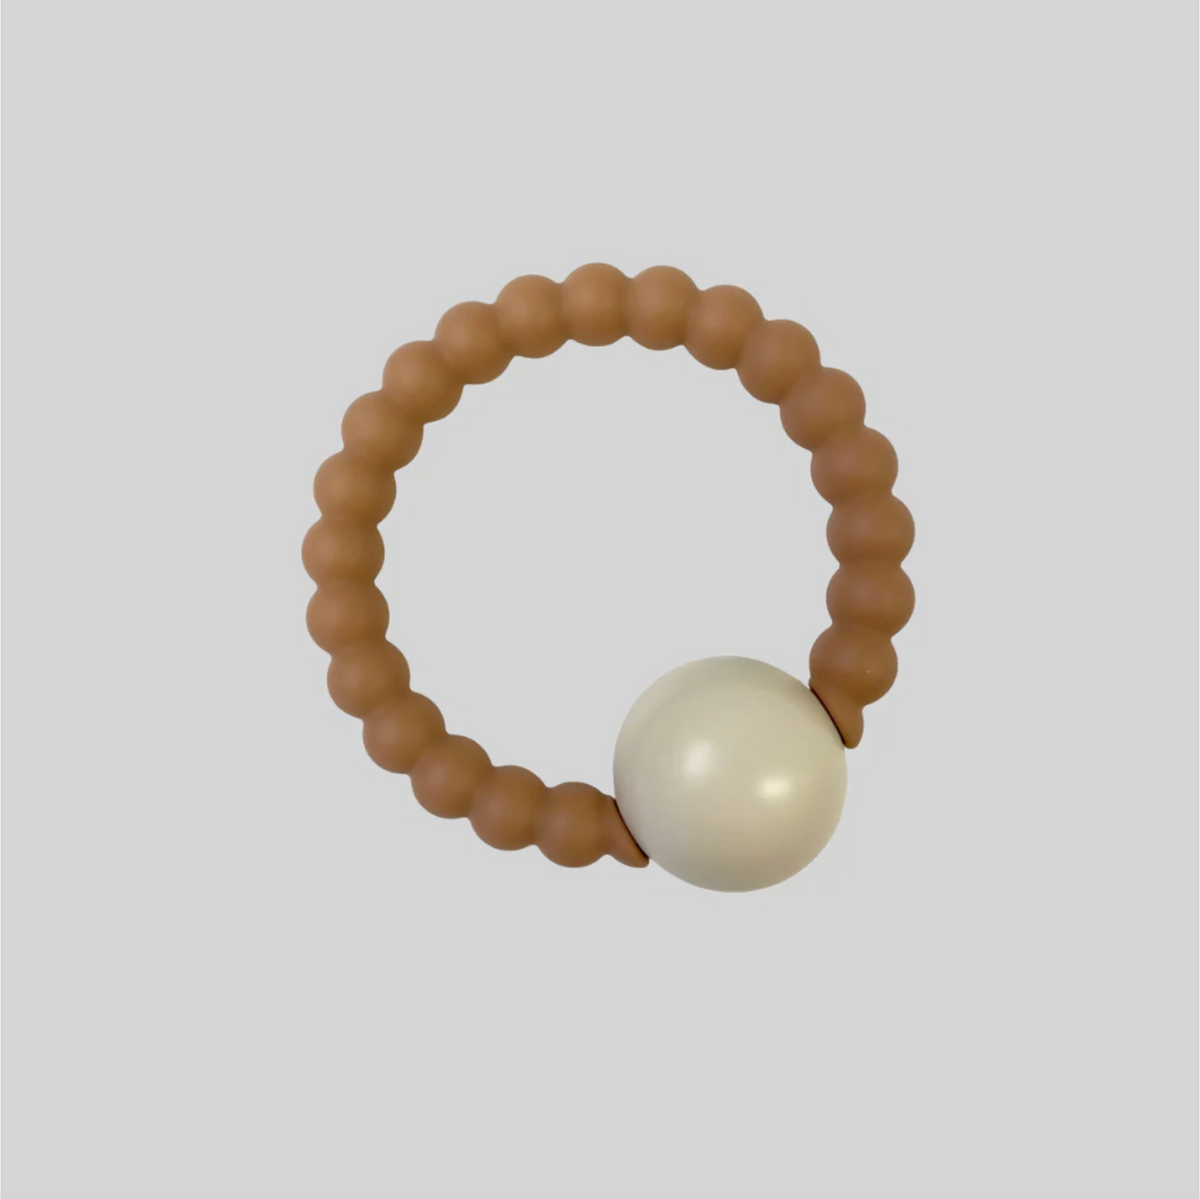 Tan Rattle Teether by Nature Bubz